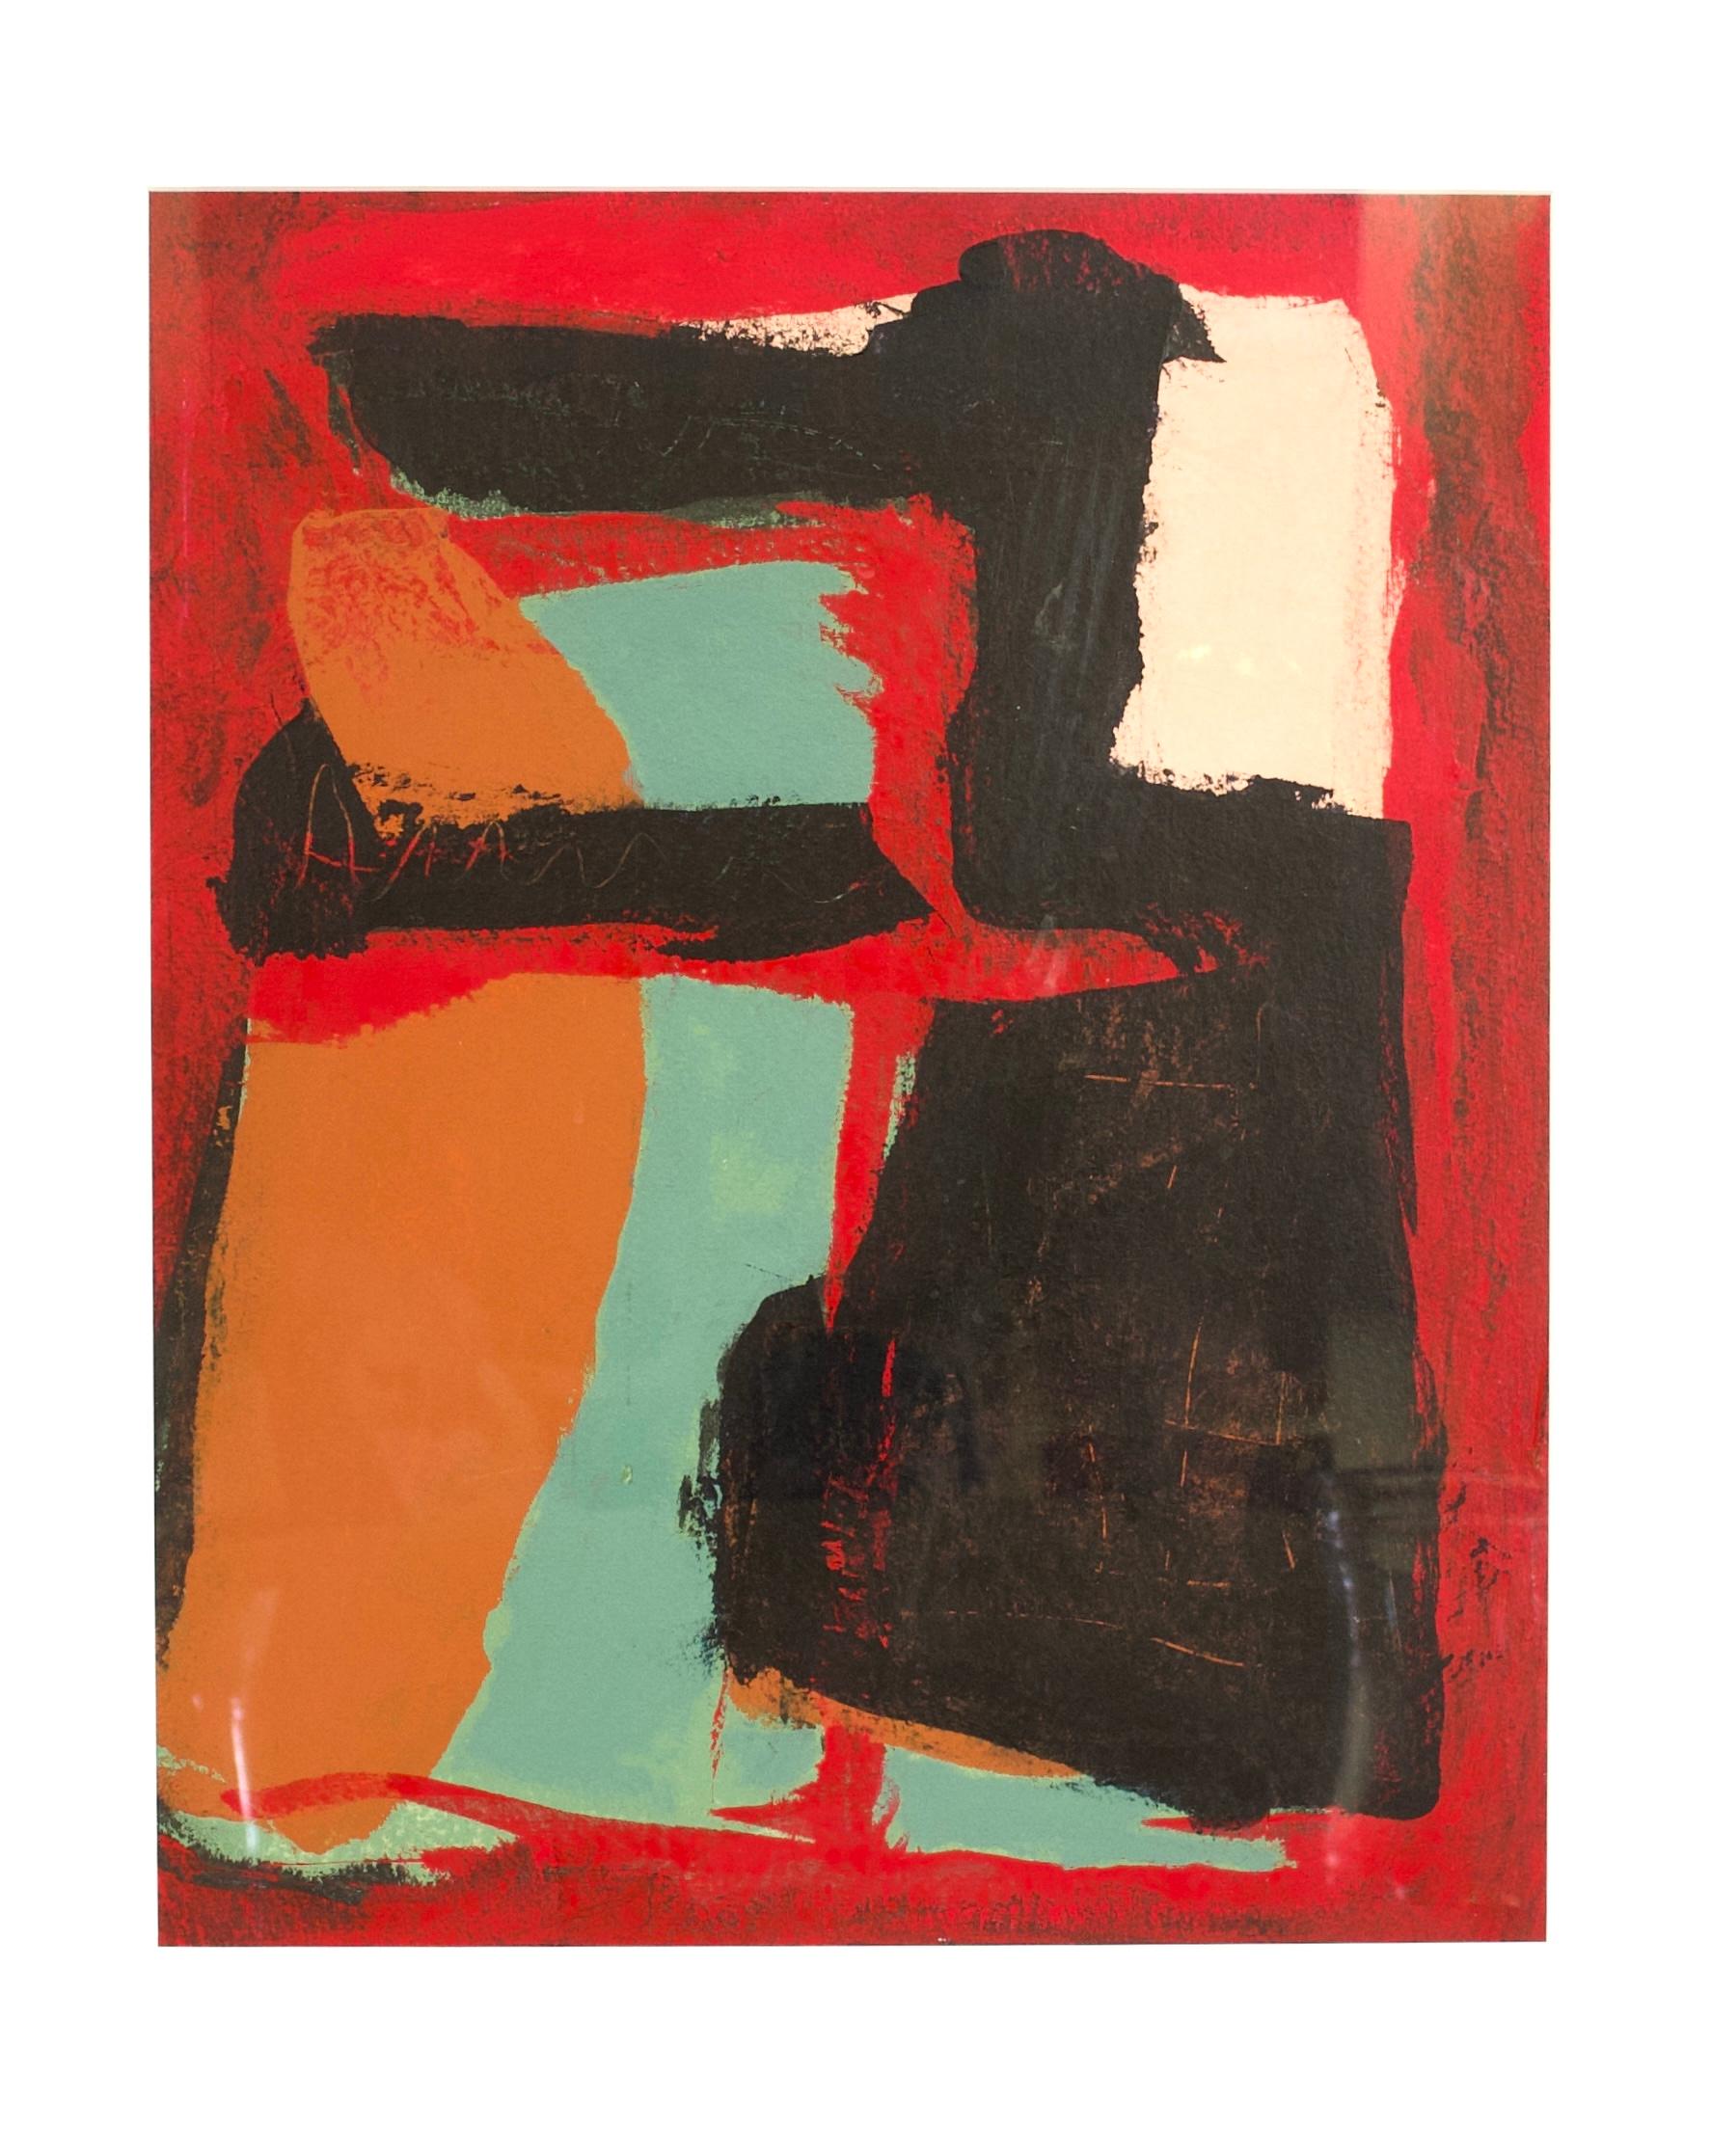 Tom Reno Abstract Painting - "Red, Black, Orange, Turquoise Abstract" Gesture Painting Color Field